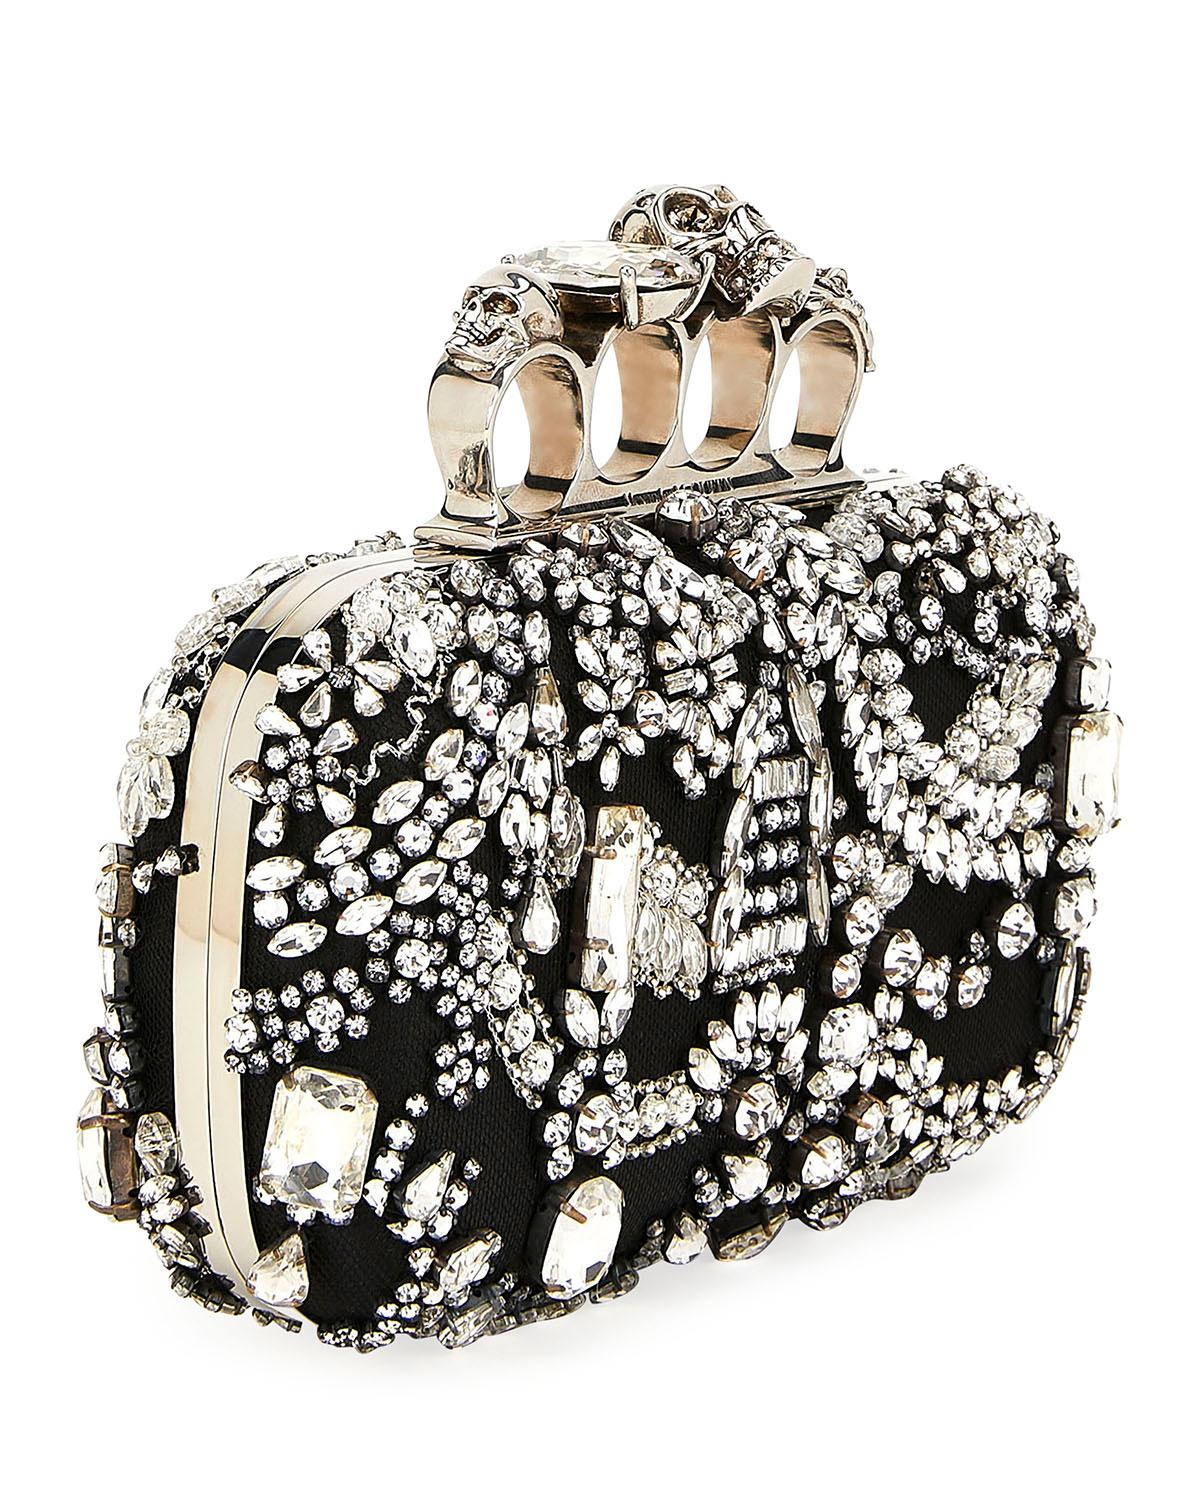 Alexander McQueen Four-ring Jeweled Skull Clutch Bag in Black - Lyst